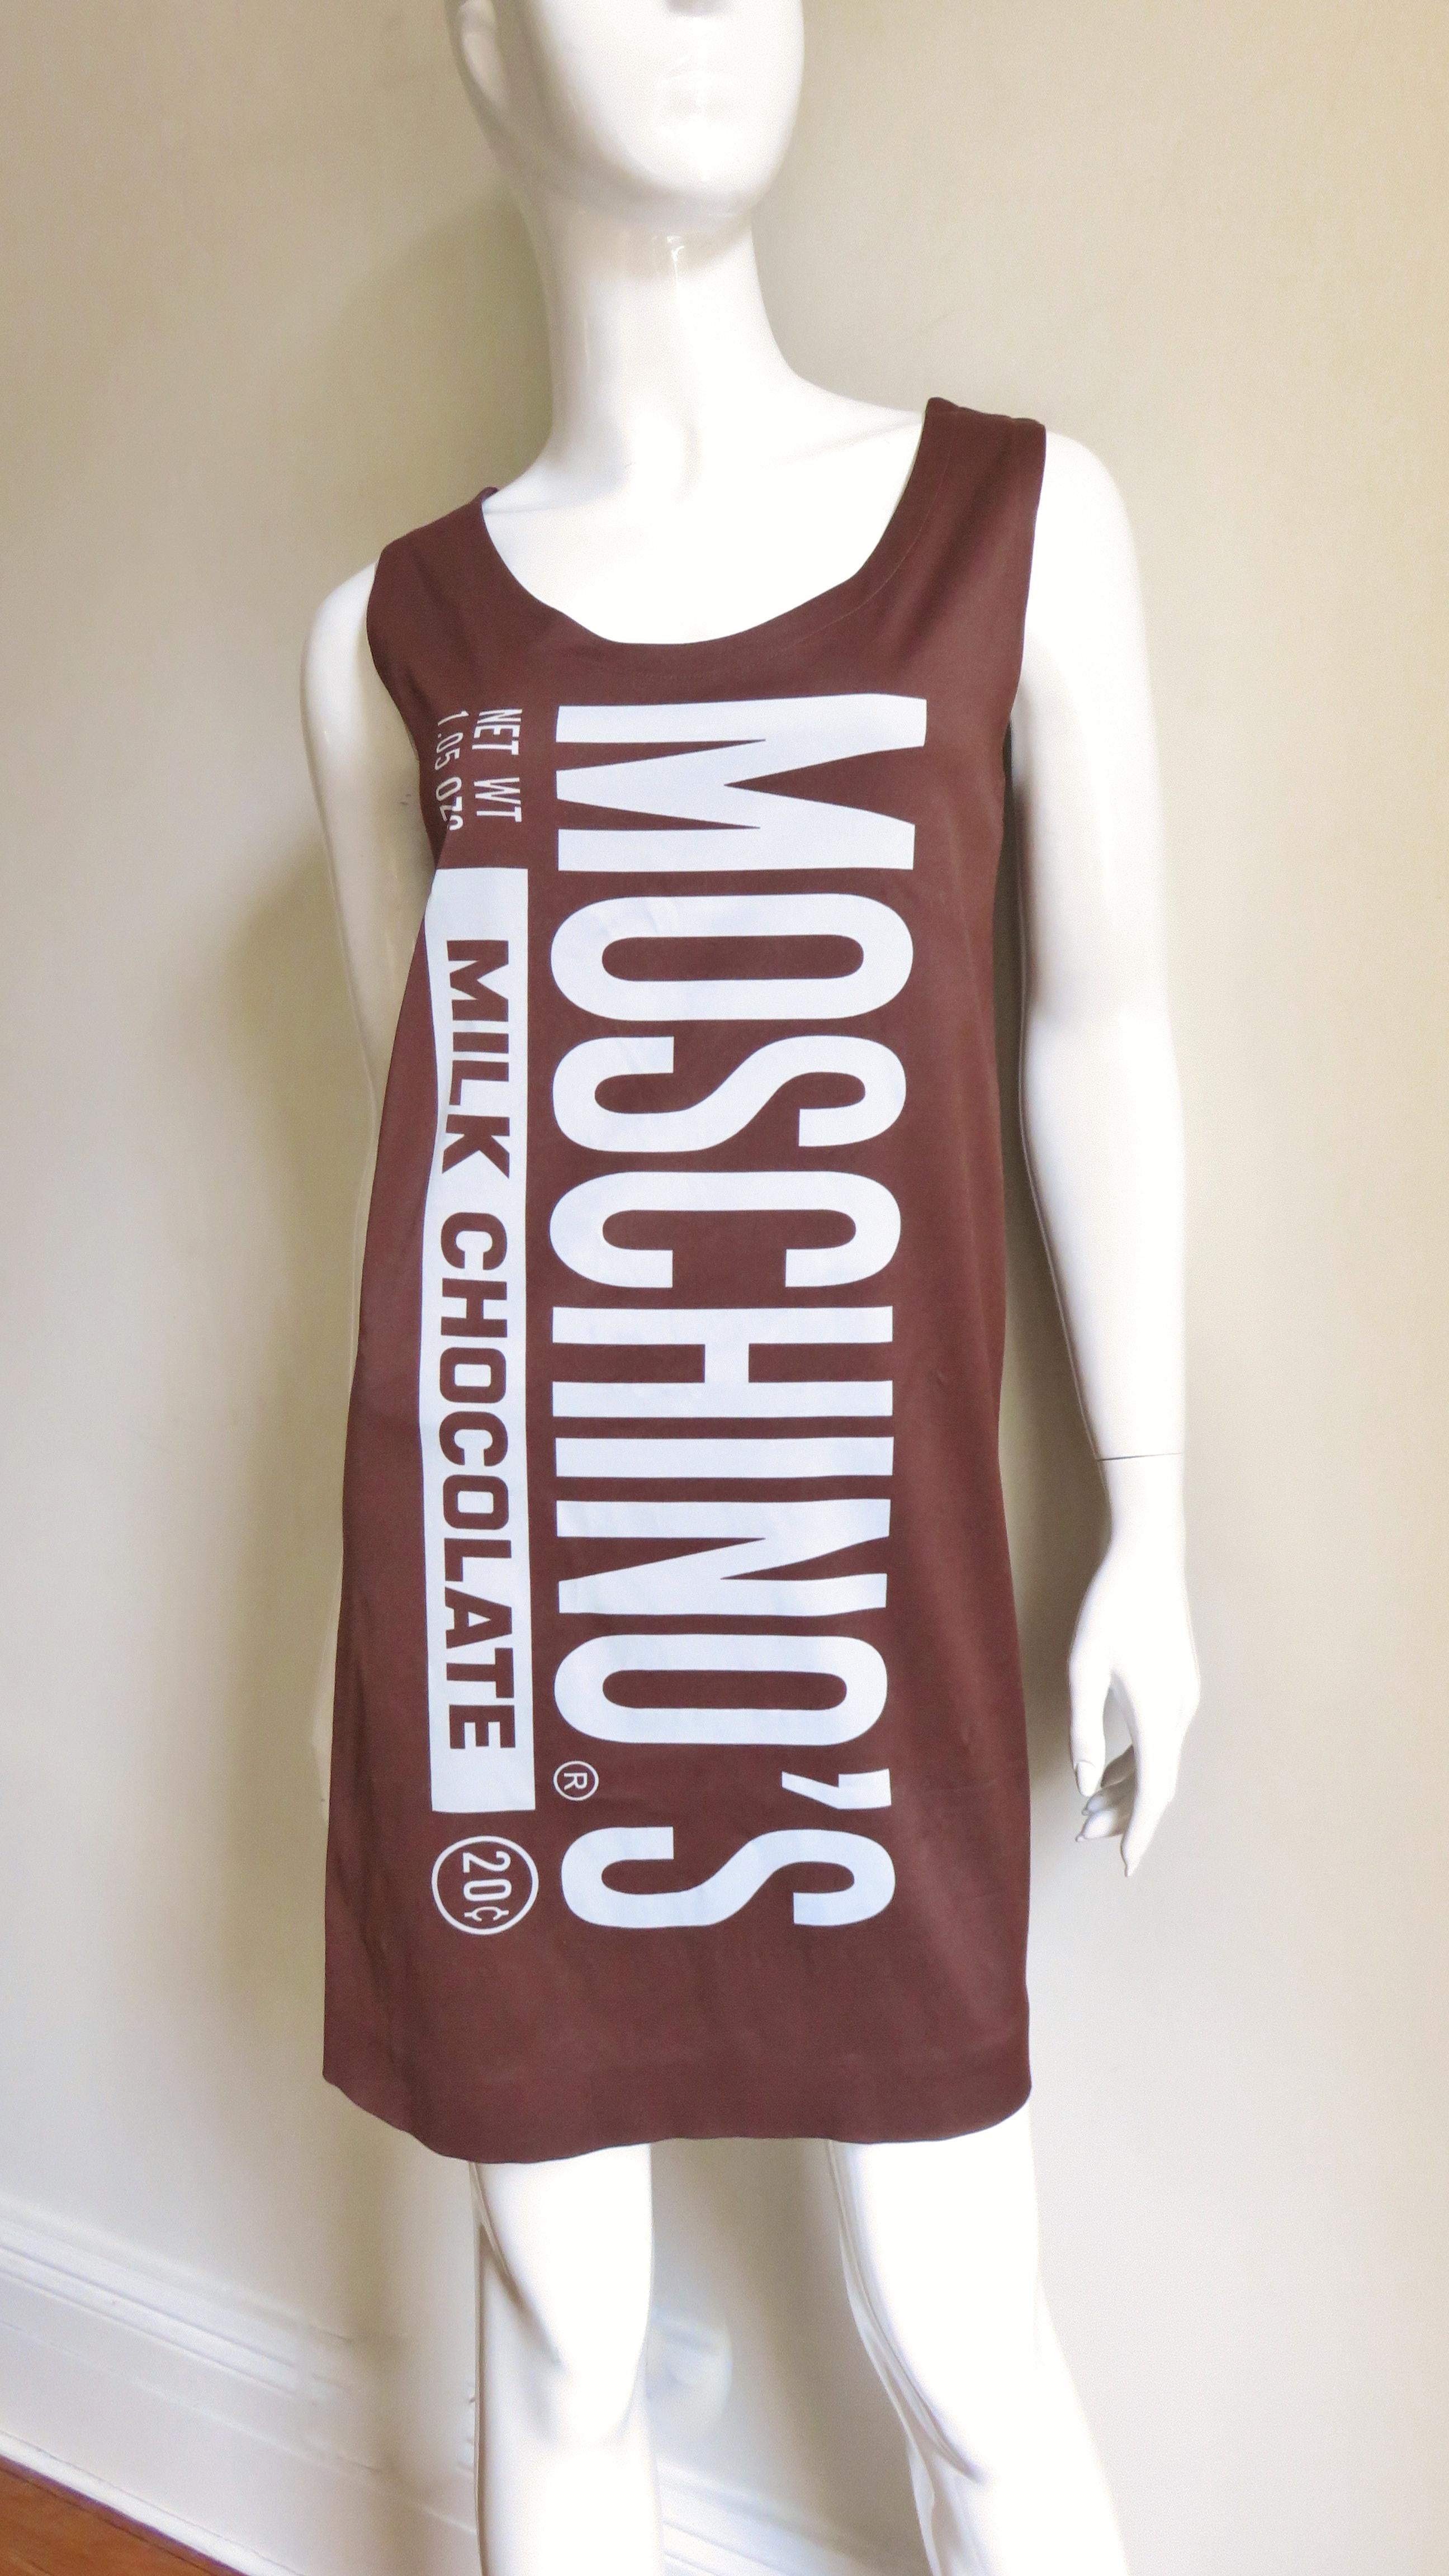 From the whimsical F/W 2014-2015 Jeremy Scott collection for Moschino.
It is a shift dress in a chocolate brown jersey with white lettering mimicking the front of a chocolate bar wrapper. On the back are the nutritional components. It is sleeveless